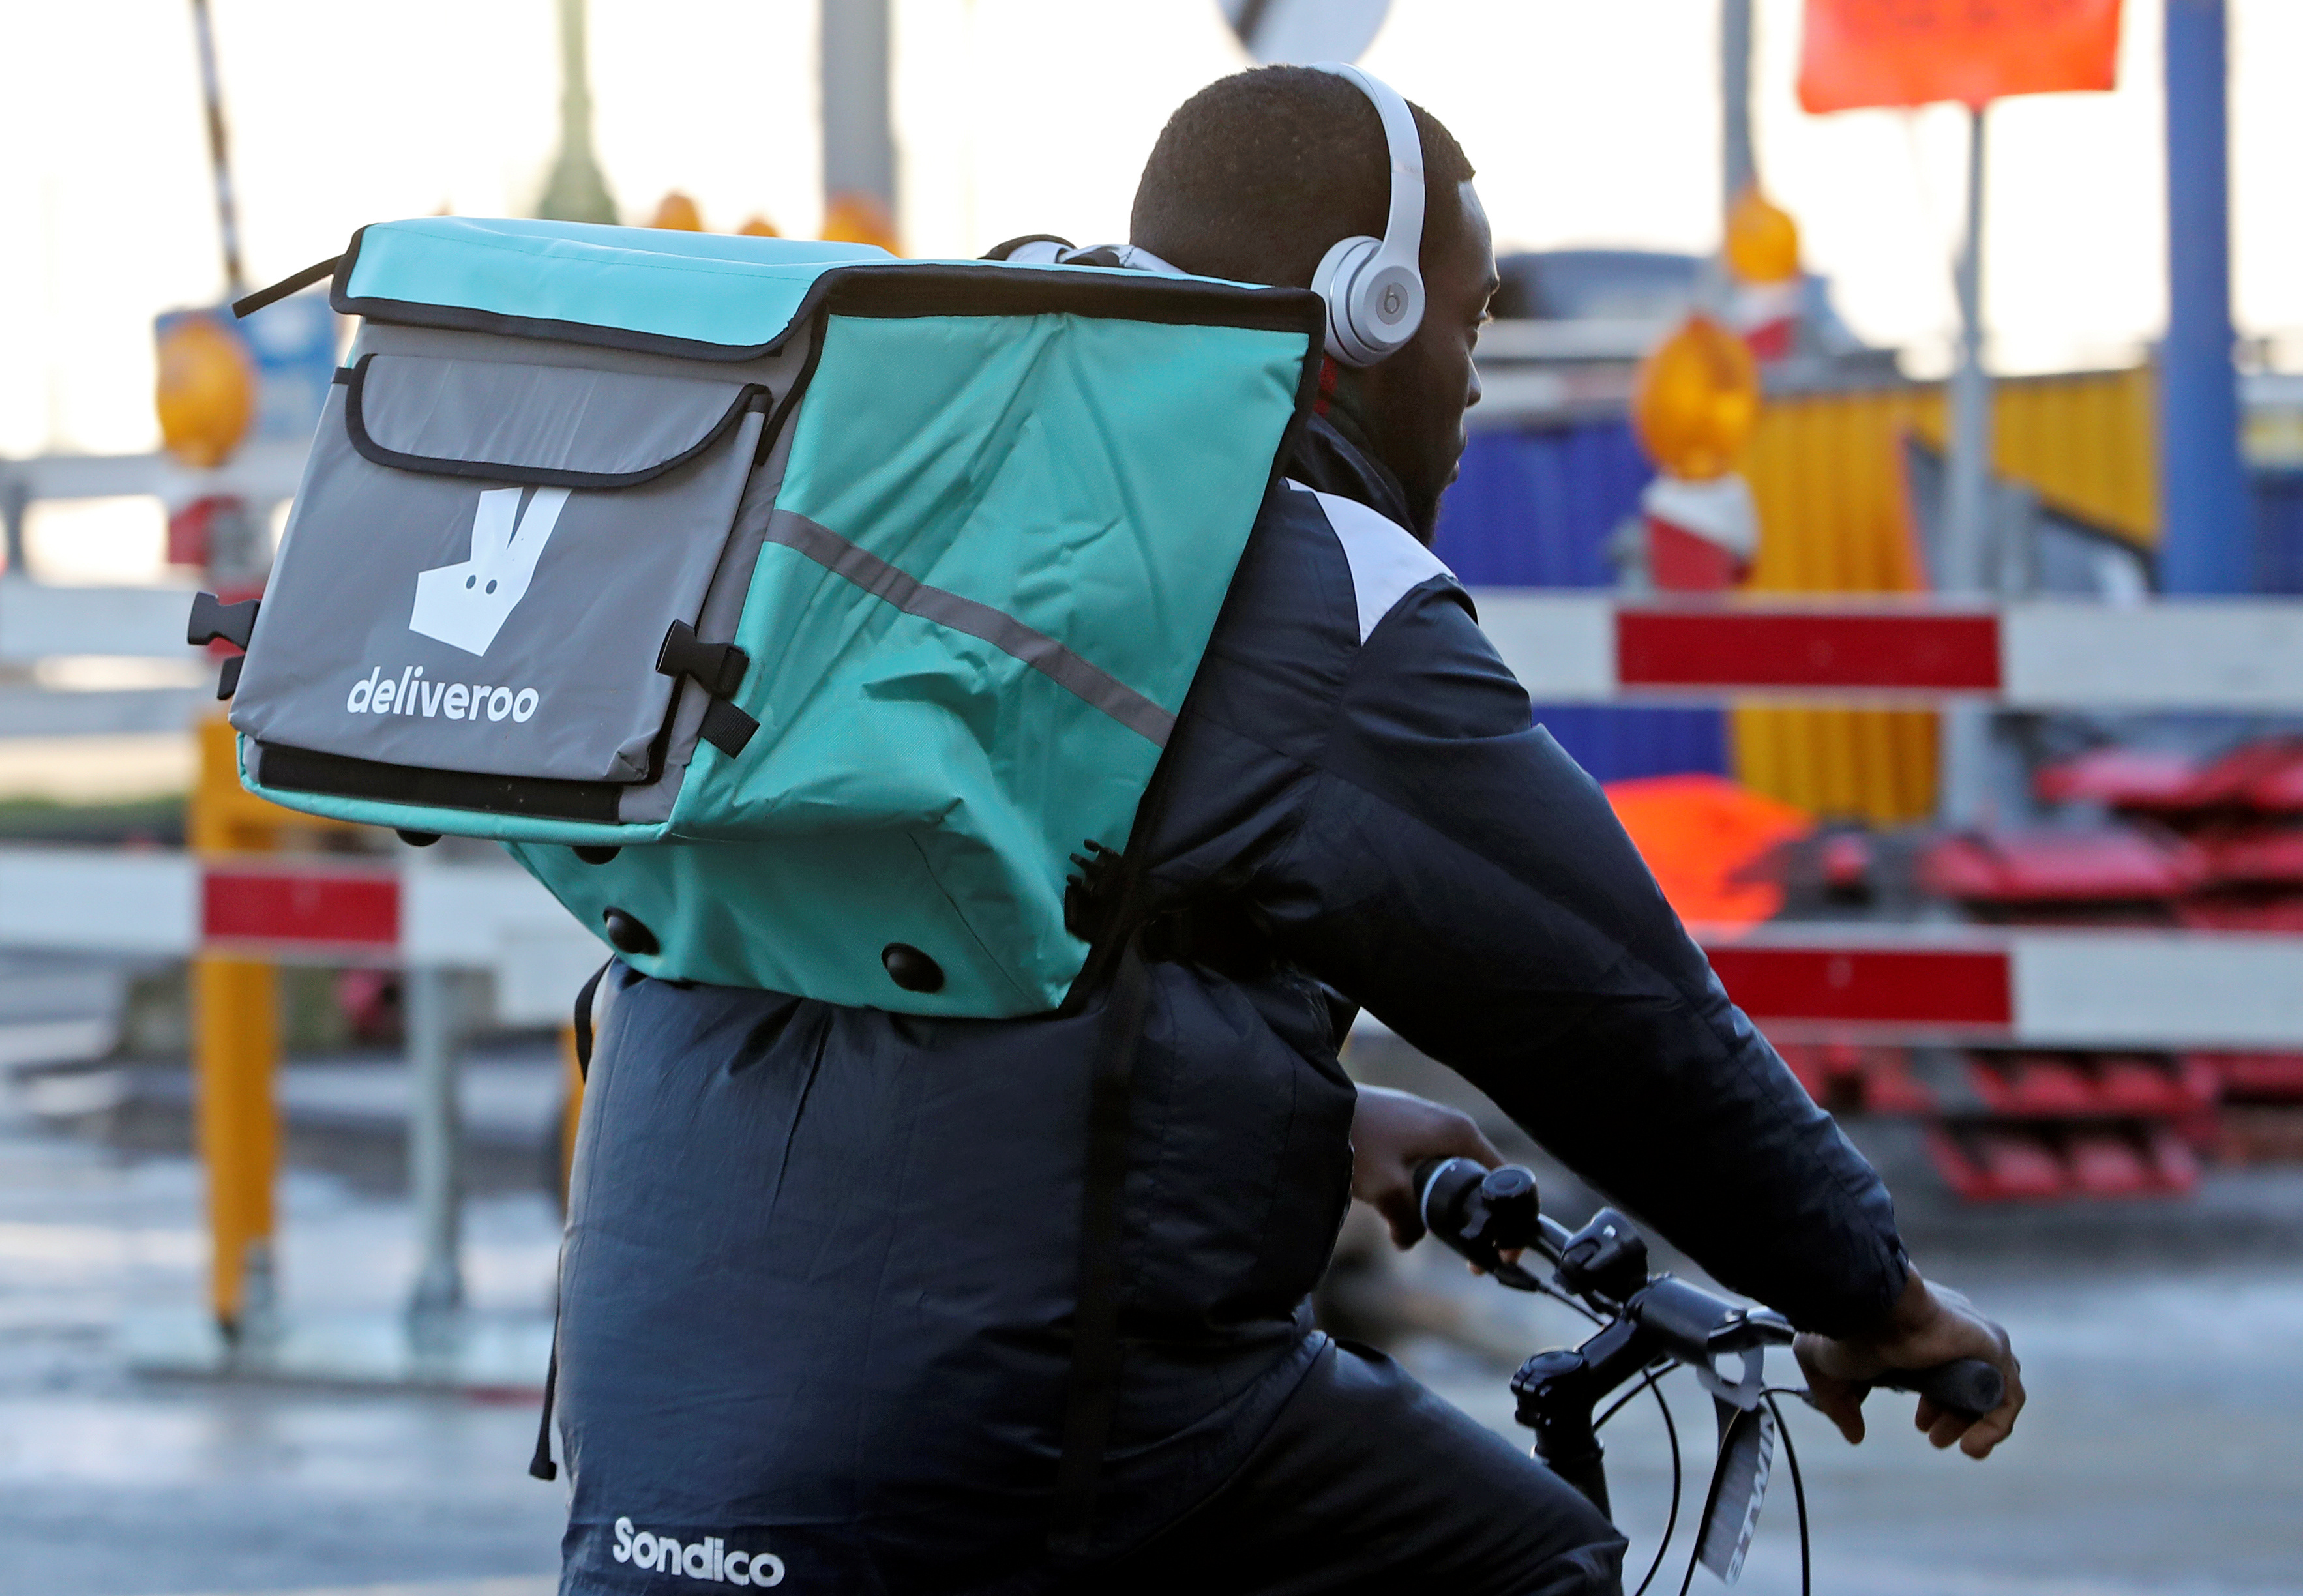 A courier for food delivery service Deliveroo rides a bike in central Brussels